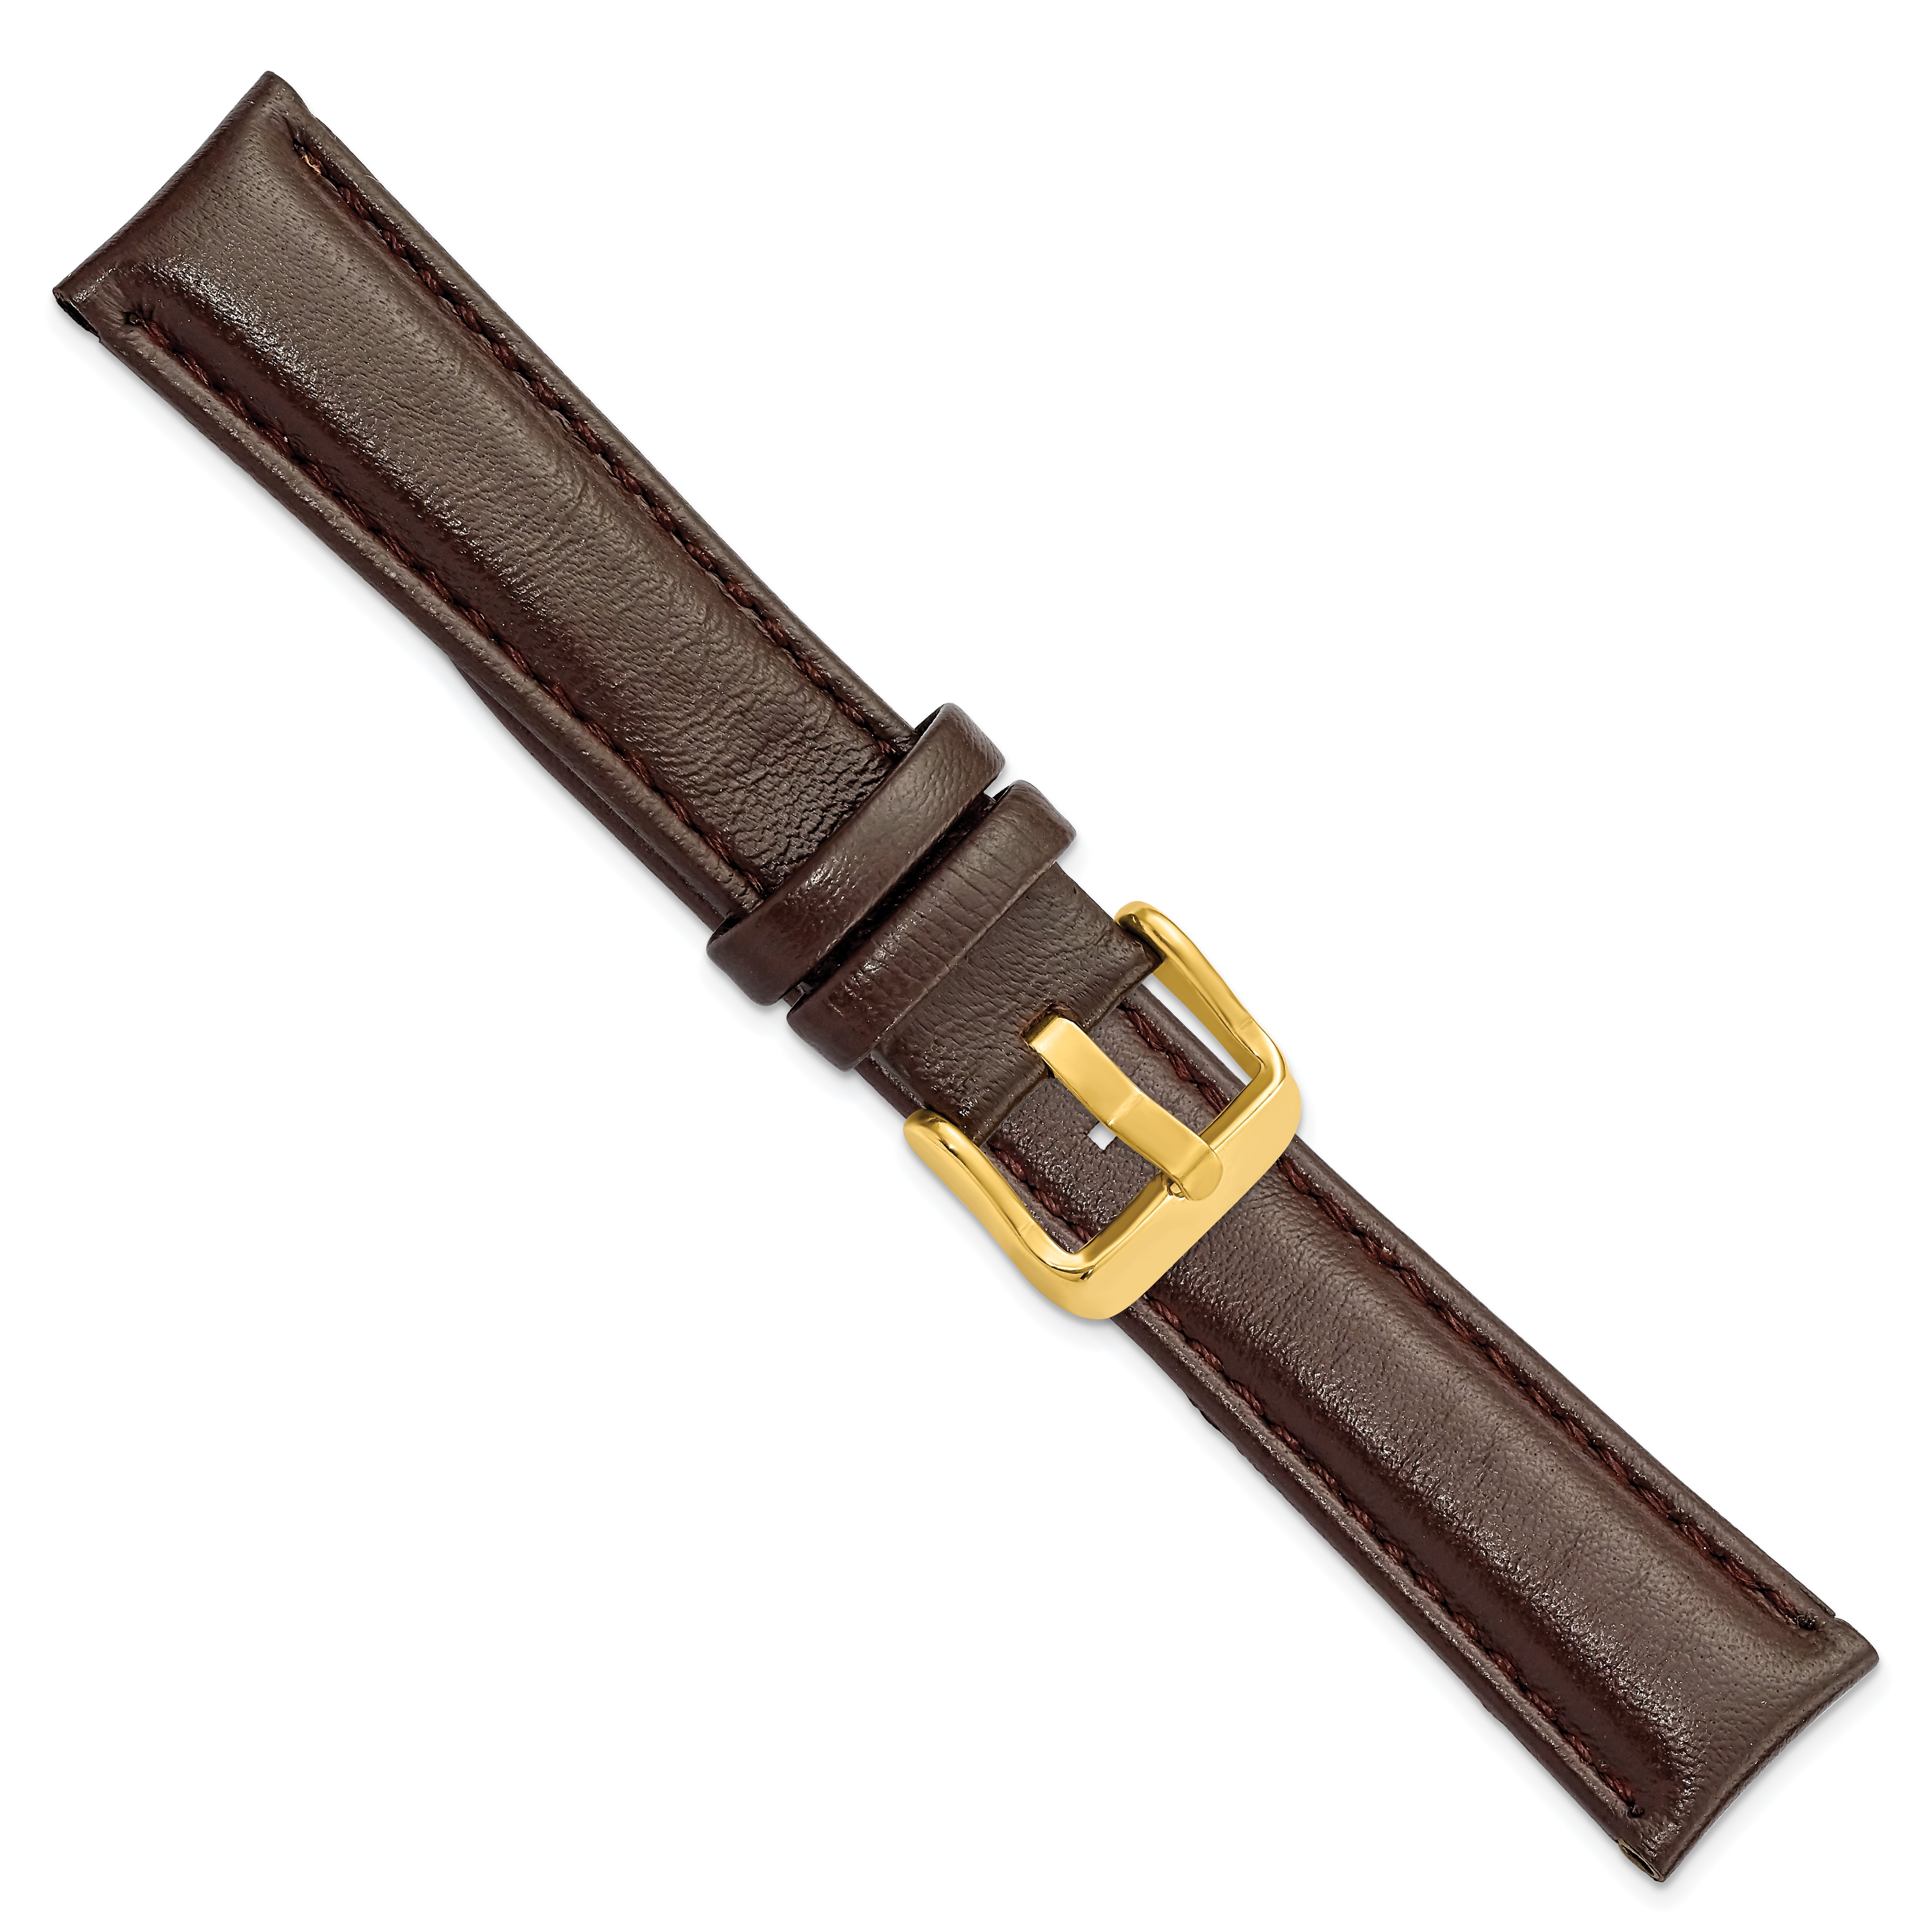 14mm Dark Brown Glove Leather with Gold-tone Panerai Style Buckle 6.75 inch Watch Band